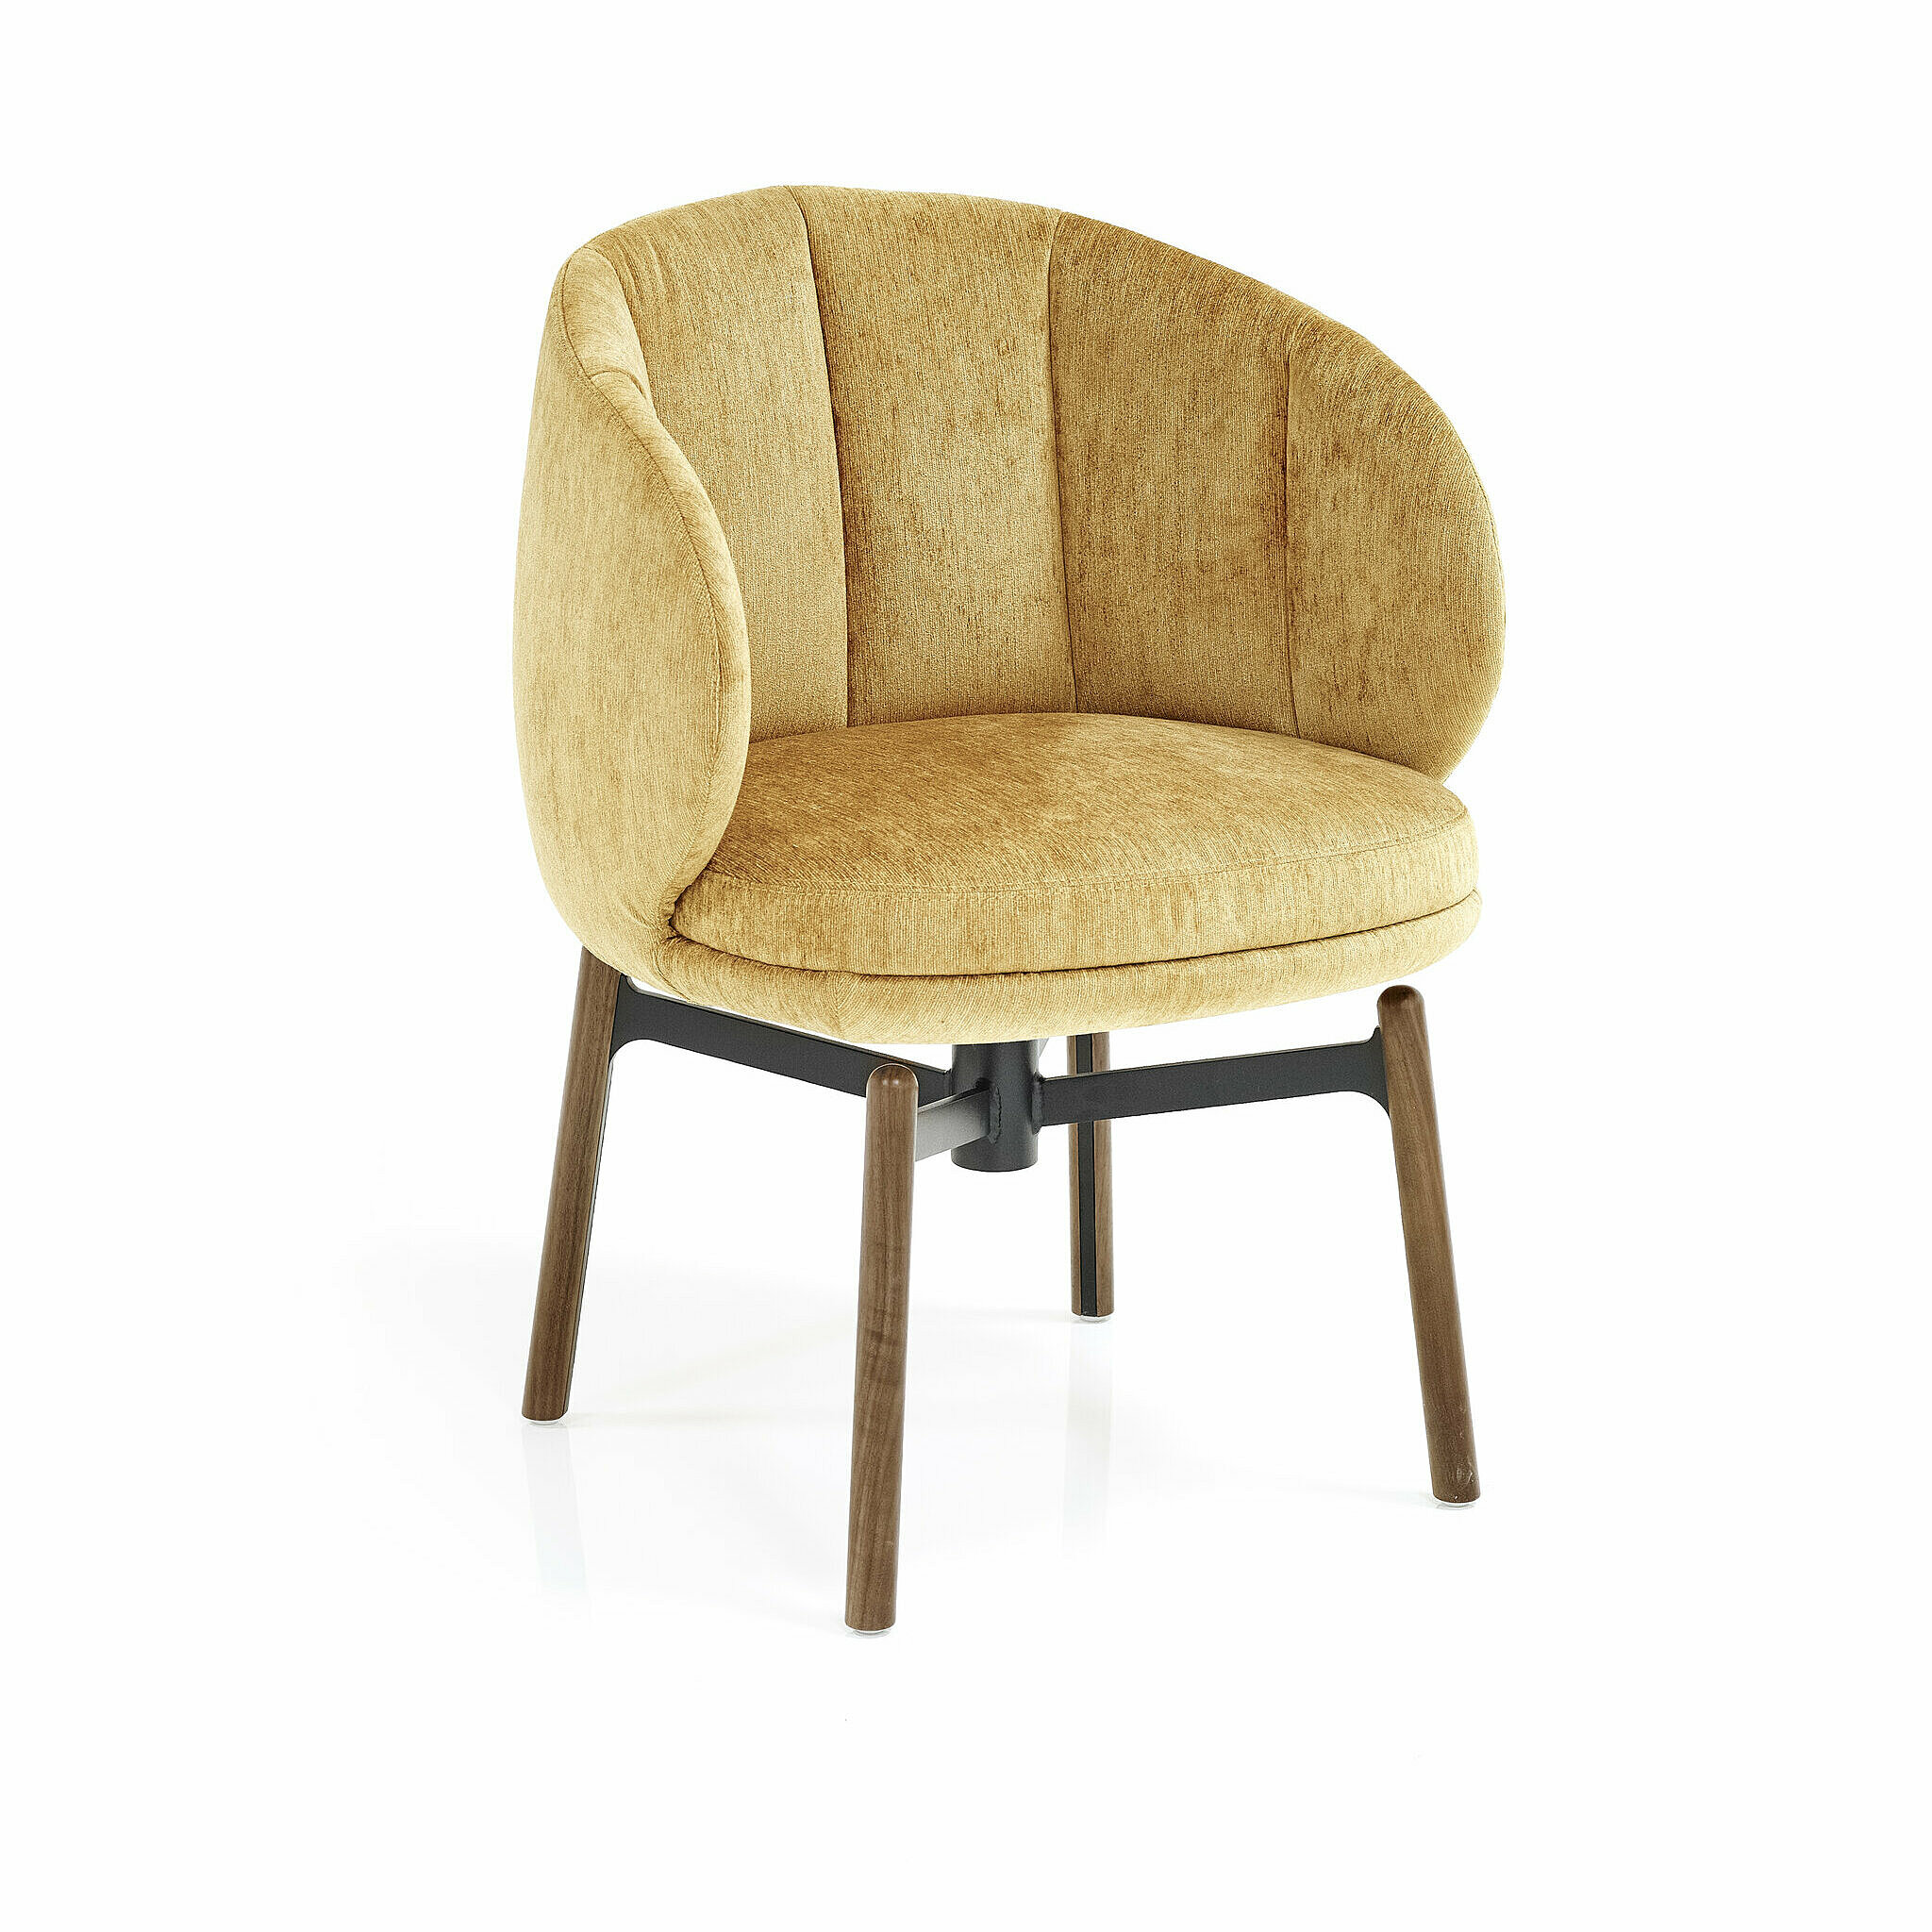 Vuelta FD Chair in gold velvet upholstery with swivel base with wooden legs